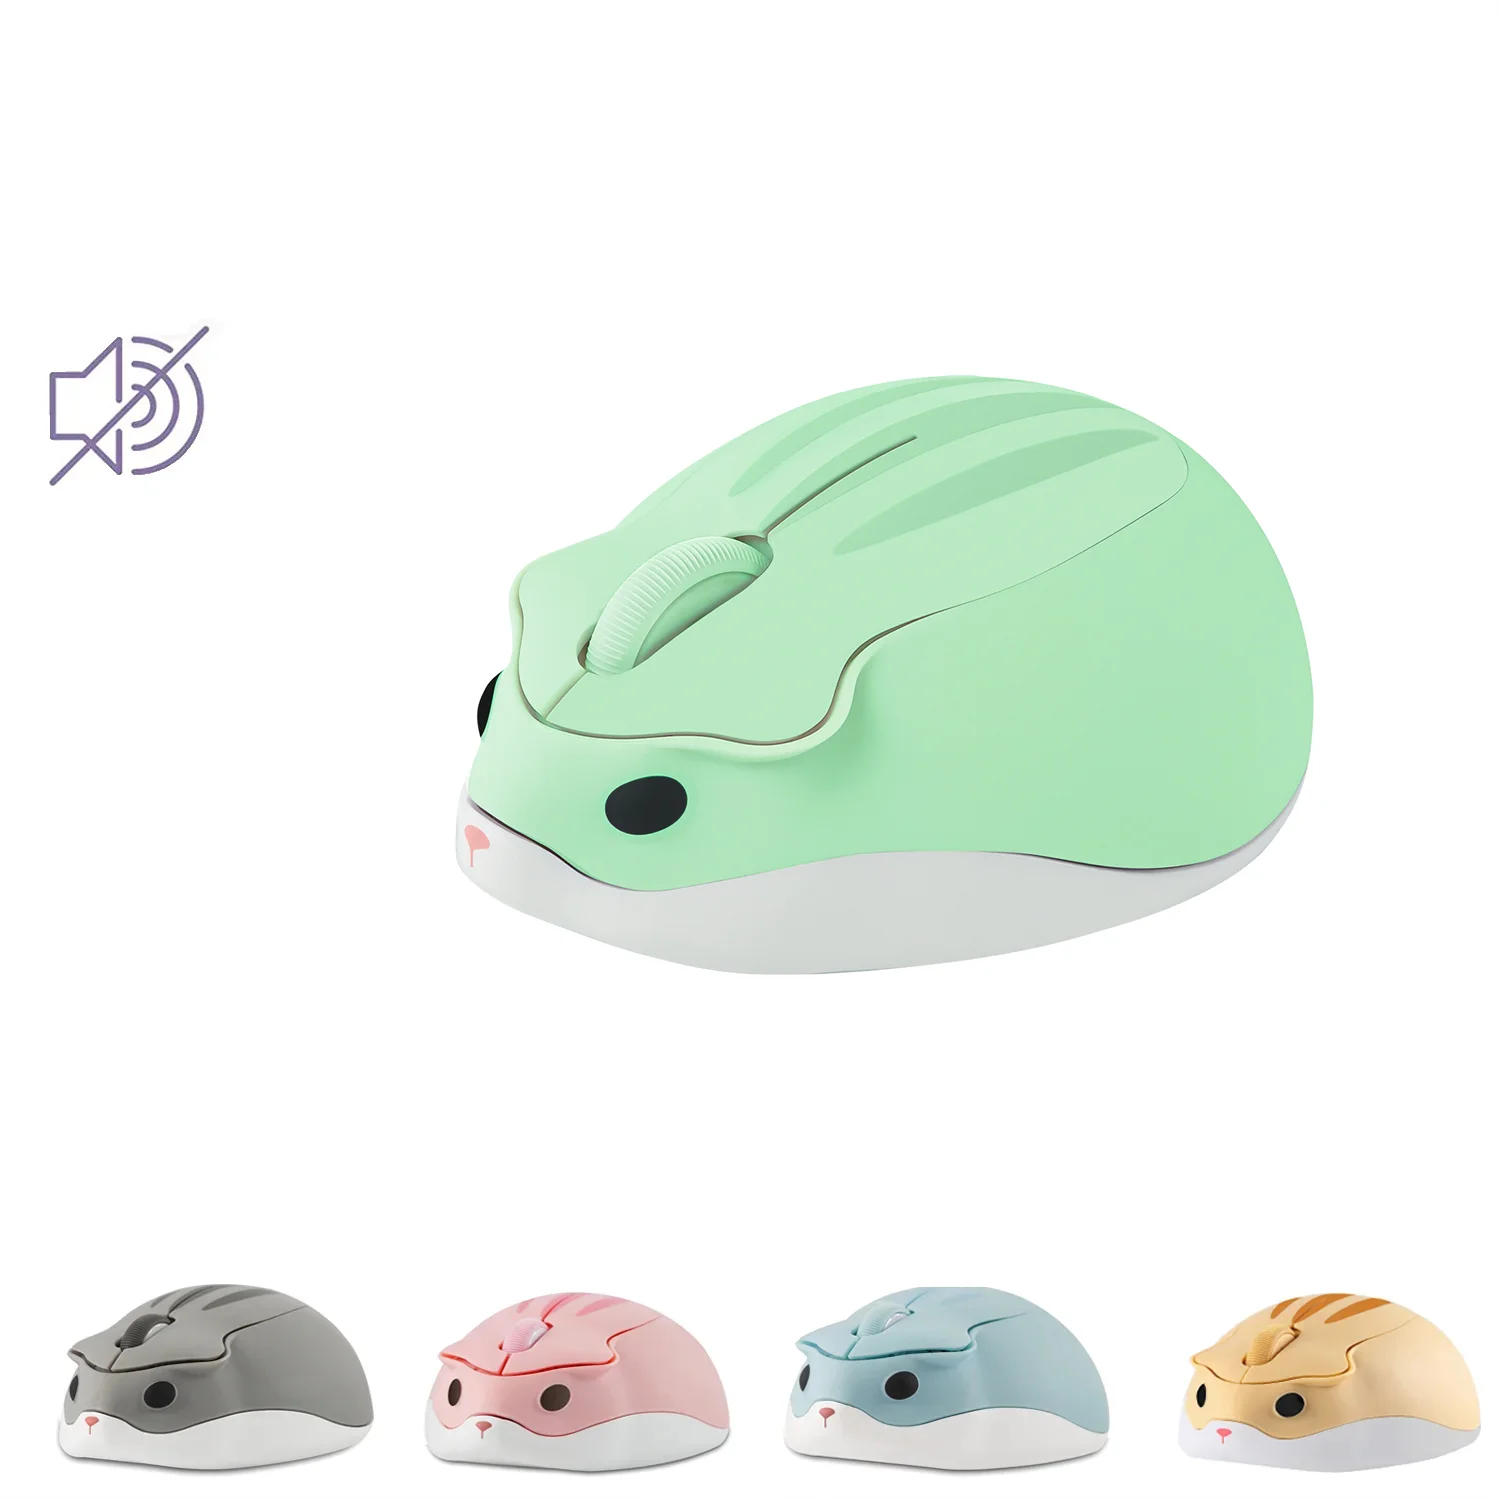 

2.4G Wireless Mouse Cute Hamster Shape Creative Mice For Girl Gift Optical 3D Mini Mouse 1200DPI Gaming Mause For Laptop Tablet